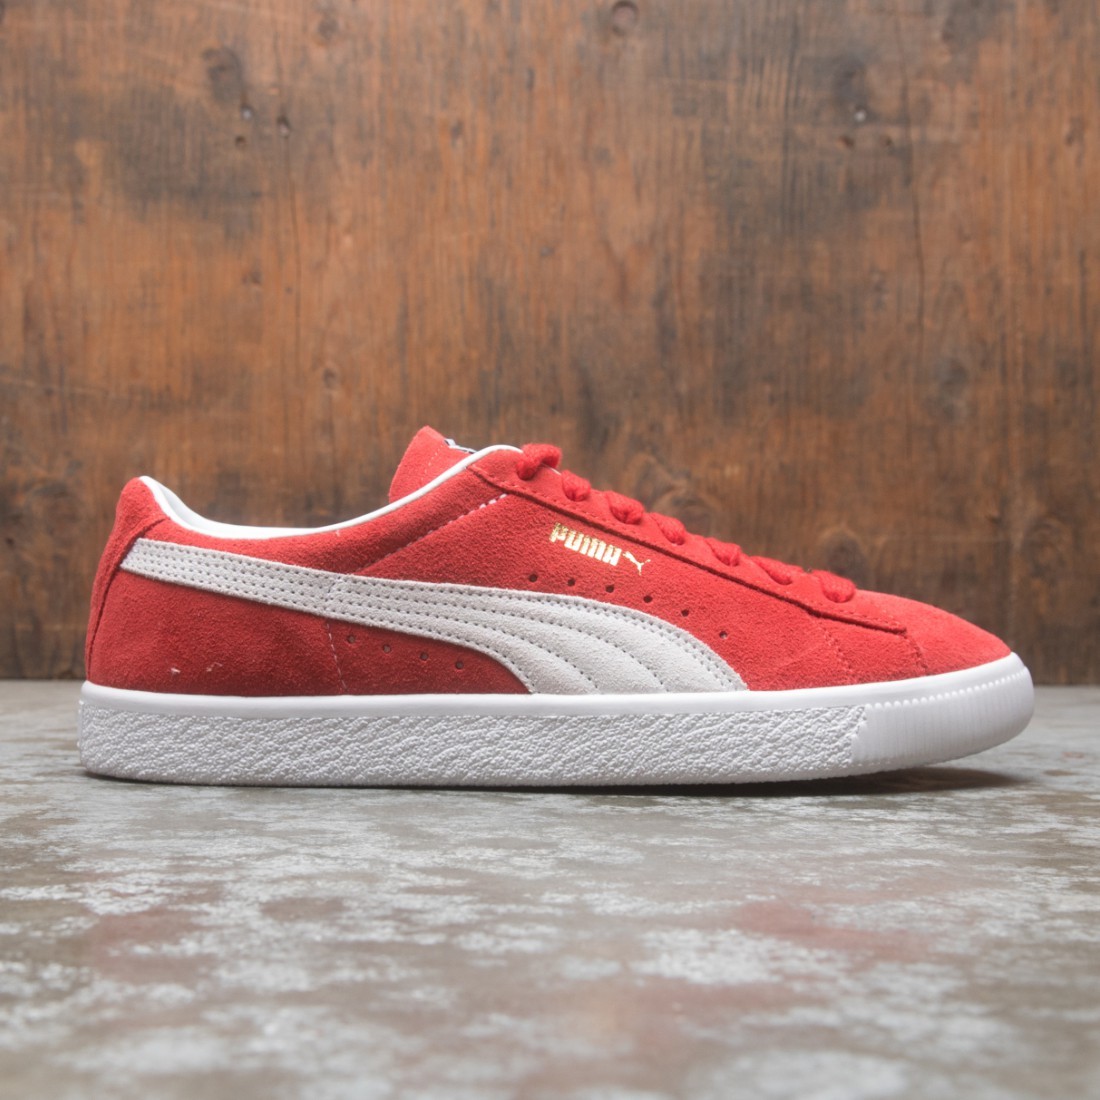 Puma also with